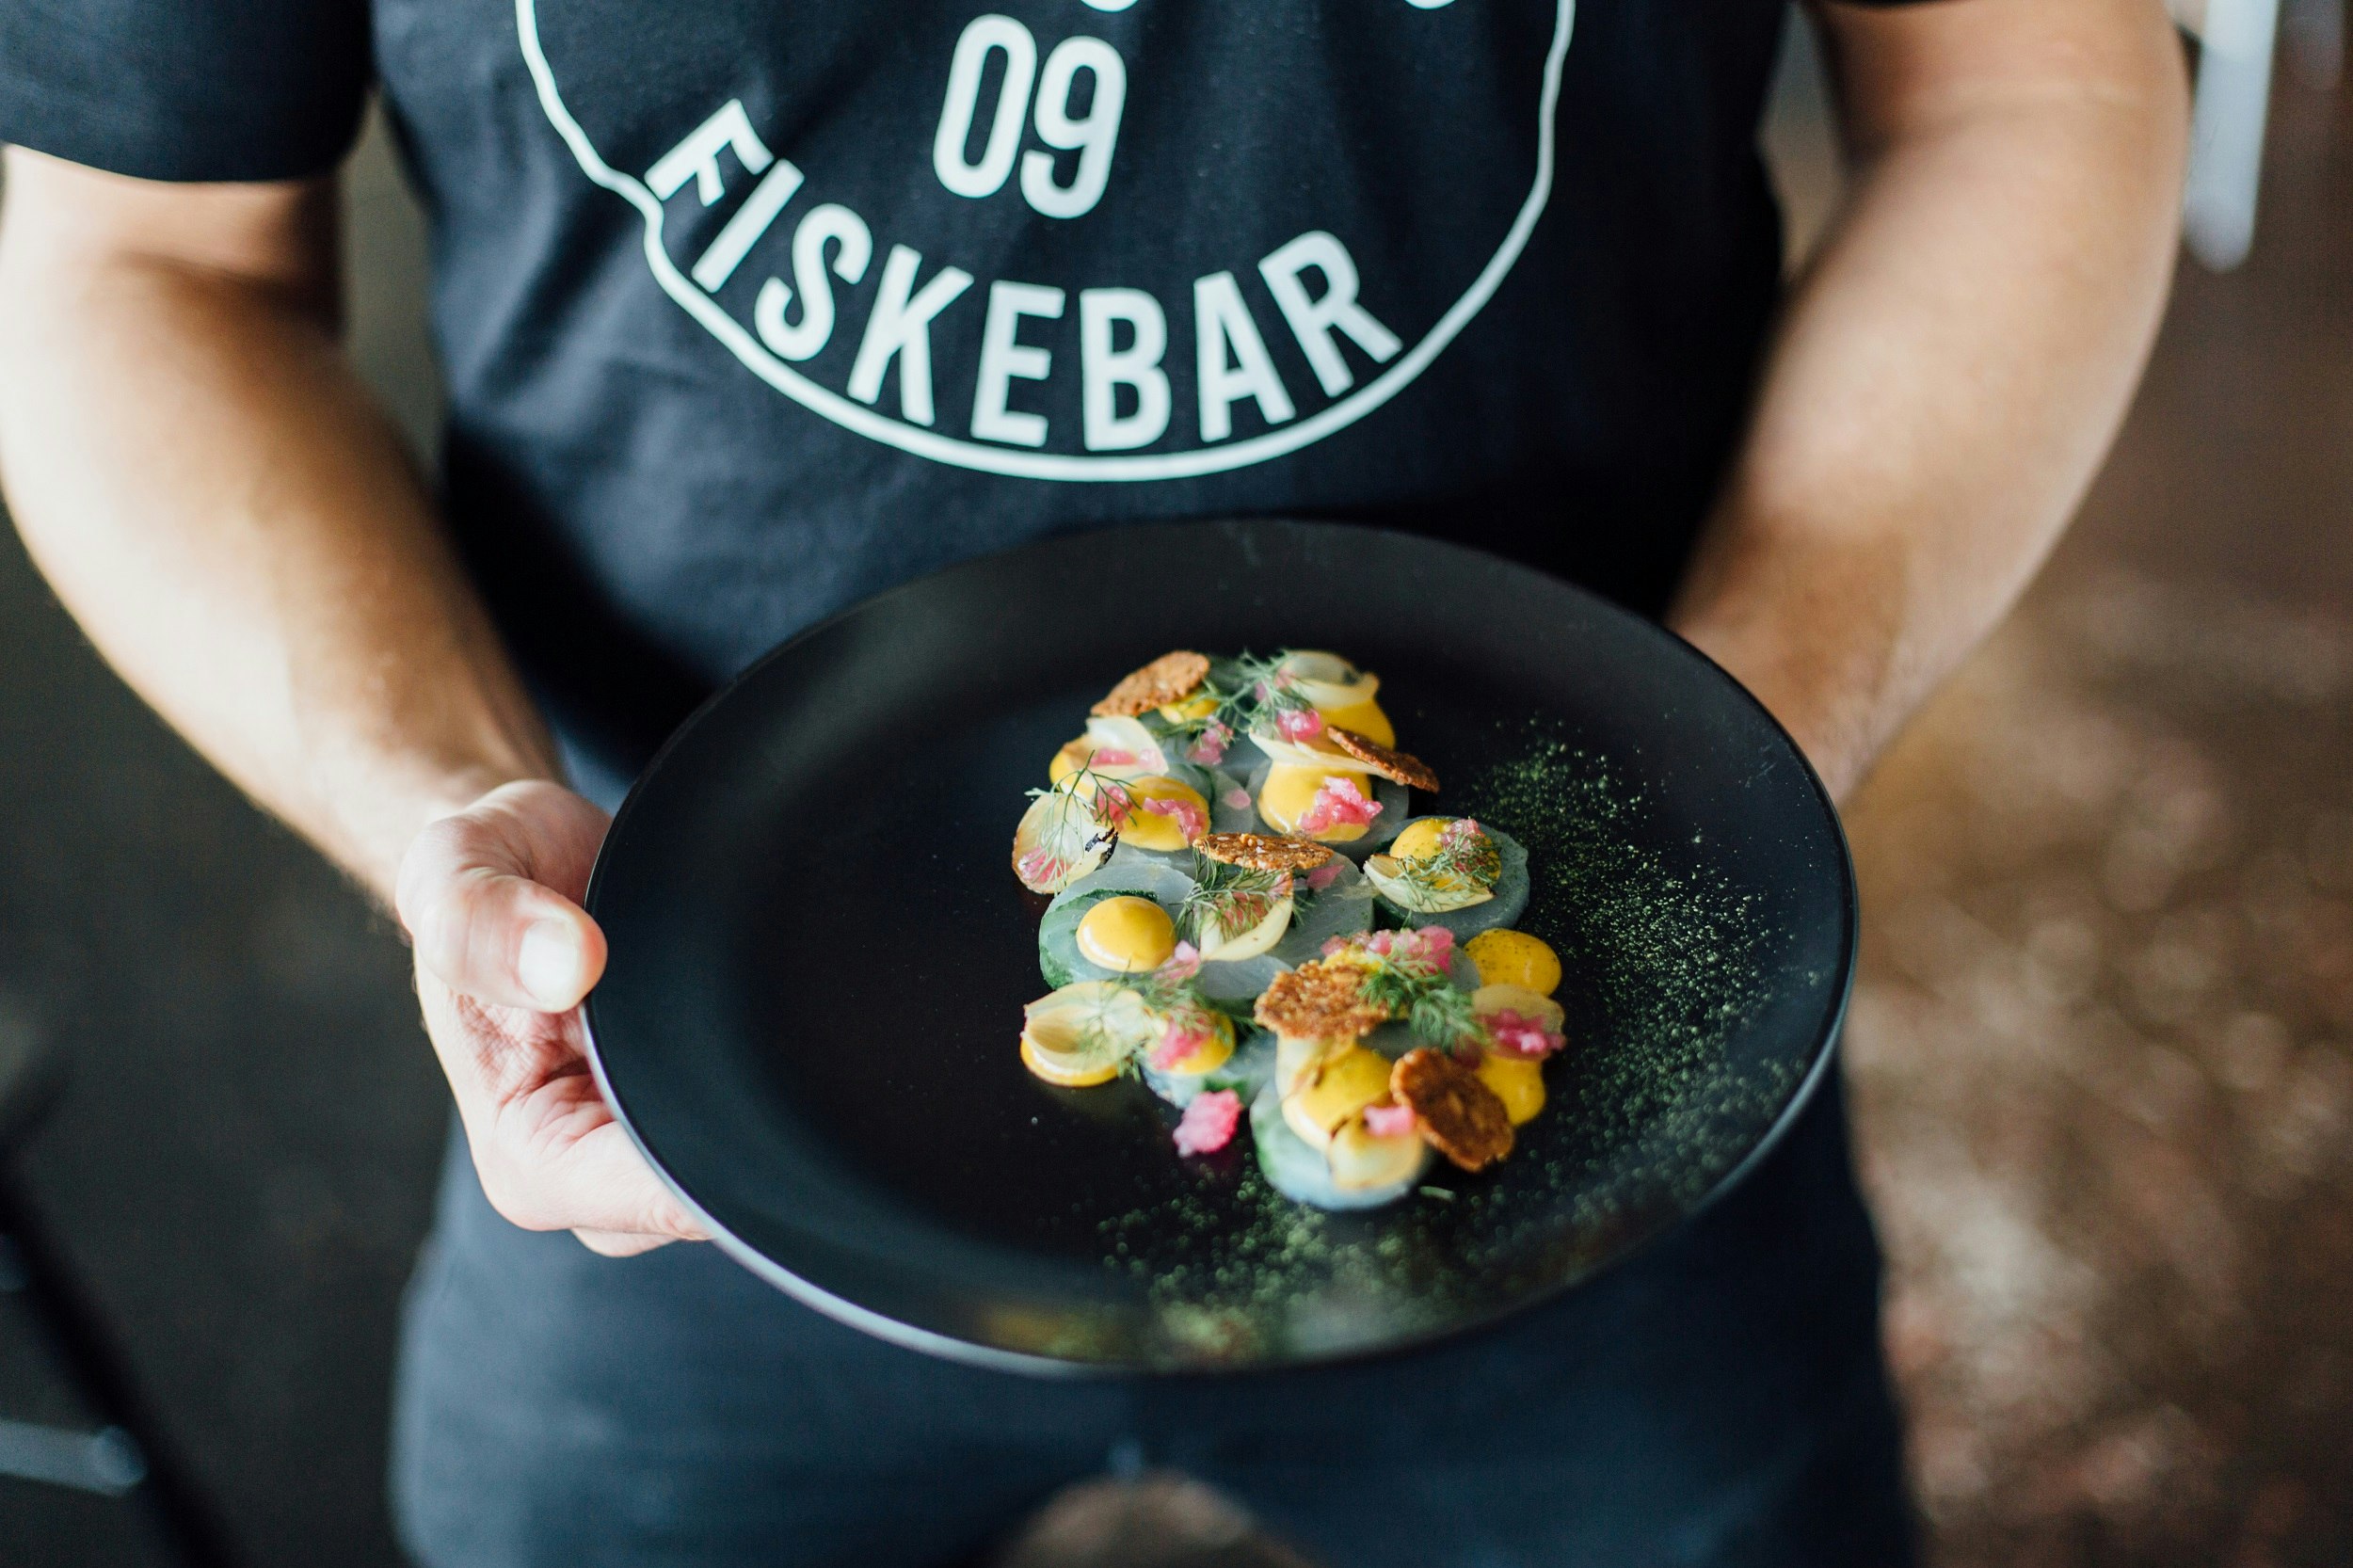 A man wearing a black T-shirt emblazoned with Fiskebar holds a black plate sprinkled with green shavings and colourful New Nordic food